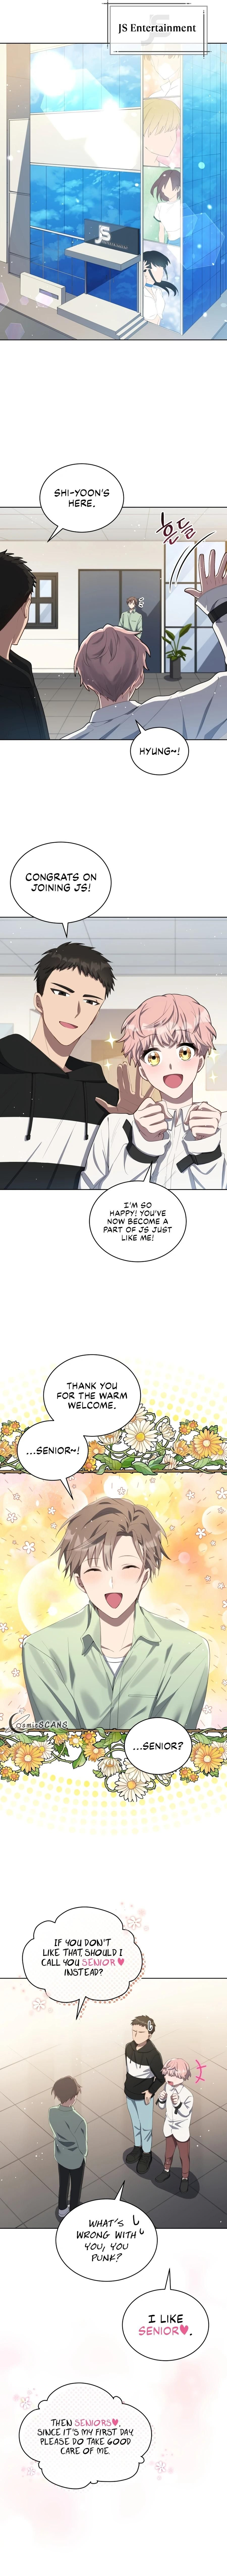 The Second Life of an All-Rounder Idol Chapter 5 - Page 3